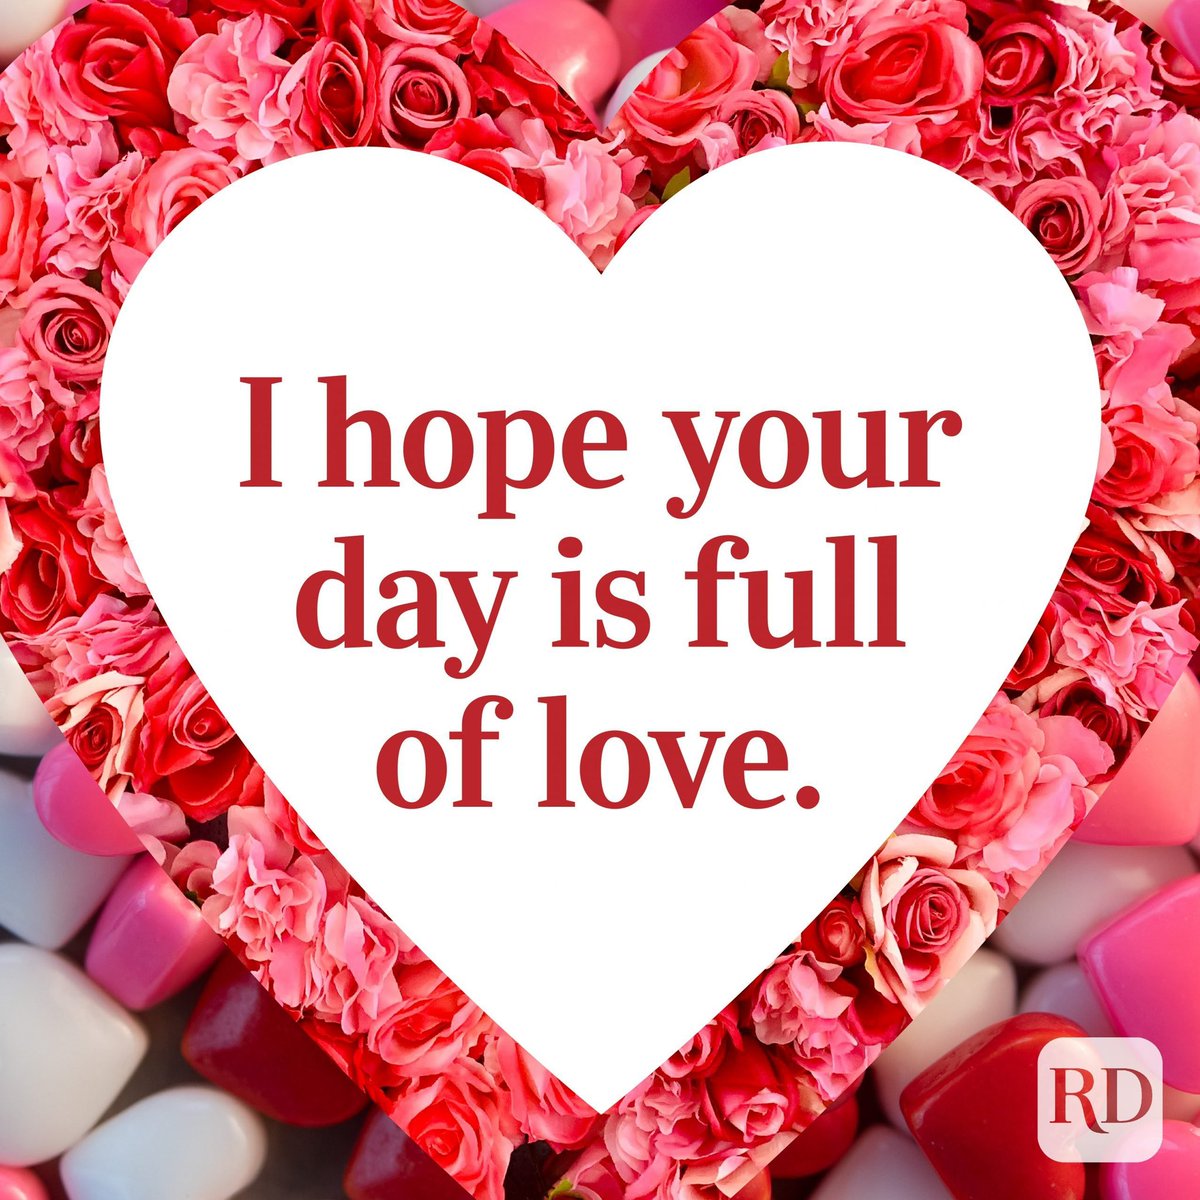 Happy Valentine’s Day! Have a fantastic day! ❤️❤️❤️ I hope that especially today you feel loved! ❤️❤️❤️ ❤️ You are loved ❤️ You are valued ❤️ You are wanted ❤️ You are needed ❤️ You are enough ❤️ You are important #Bluehand